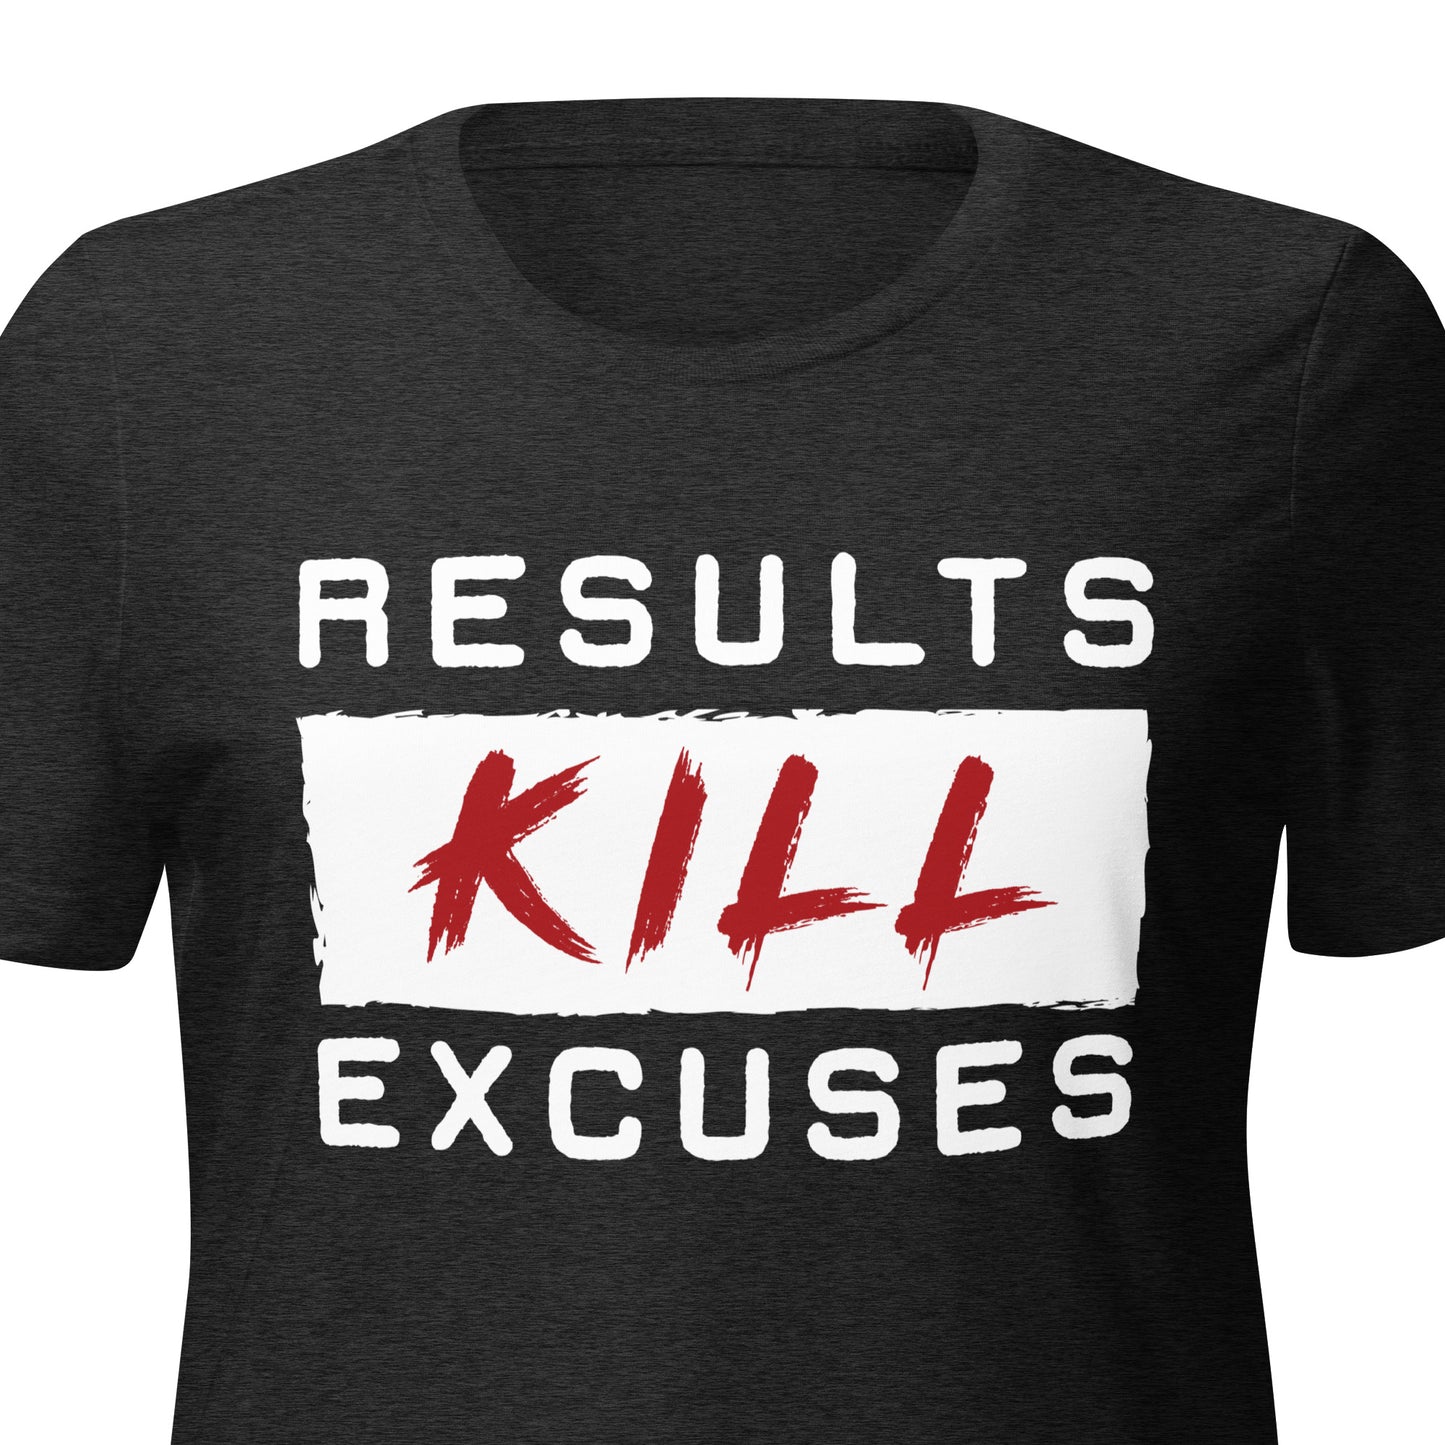 RESULTS KILL EXCUSES WOMENS